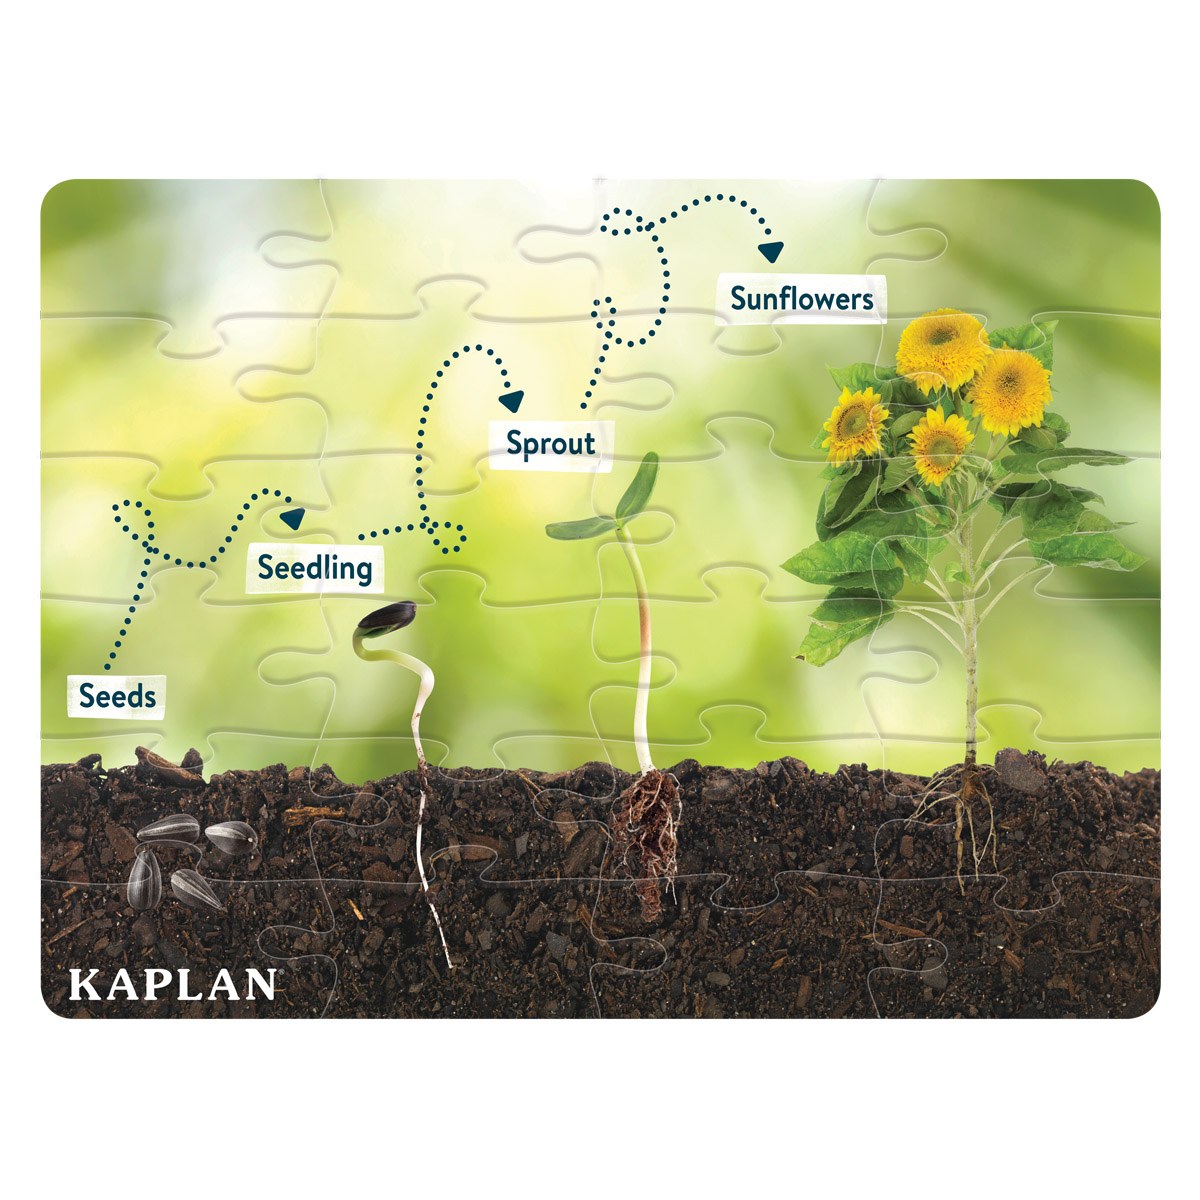 Kaplan Early Learning Company Sunflower Life Cycle Floor Puzzle from Seed to Sunflower - 24 Pieces